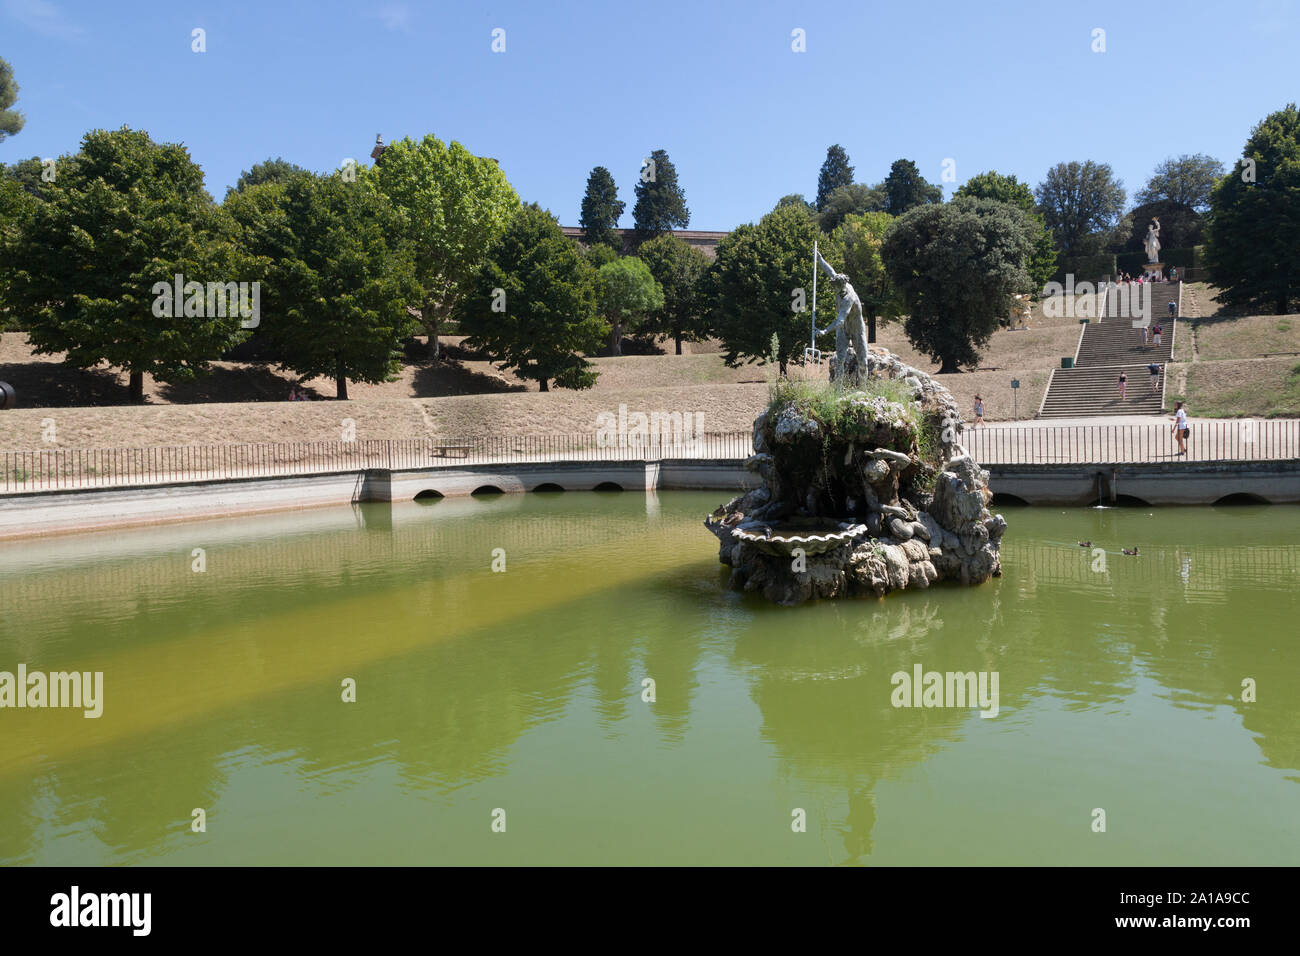 The Fountain of Neptune is a fountain in the Boboli Gardens,  Florence, Italy, situated on the Piazza della Signoria, in front of the Palazzo Vecchio. Stock Photo